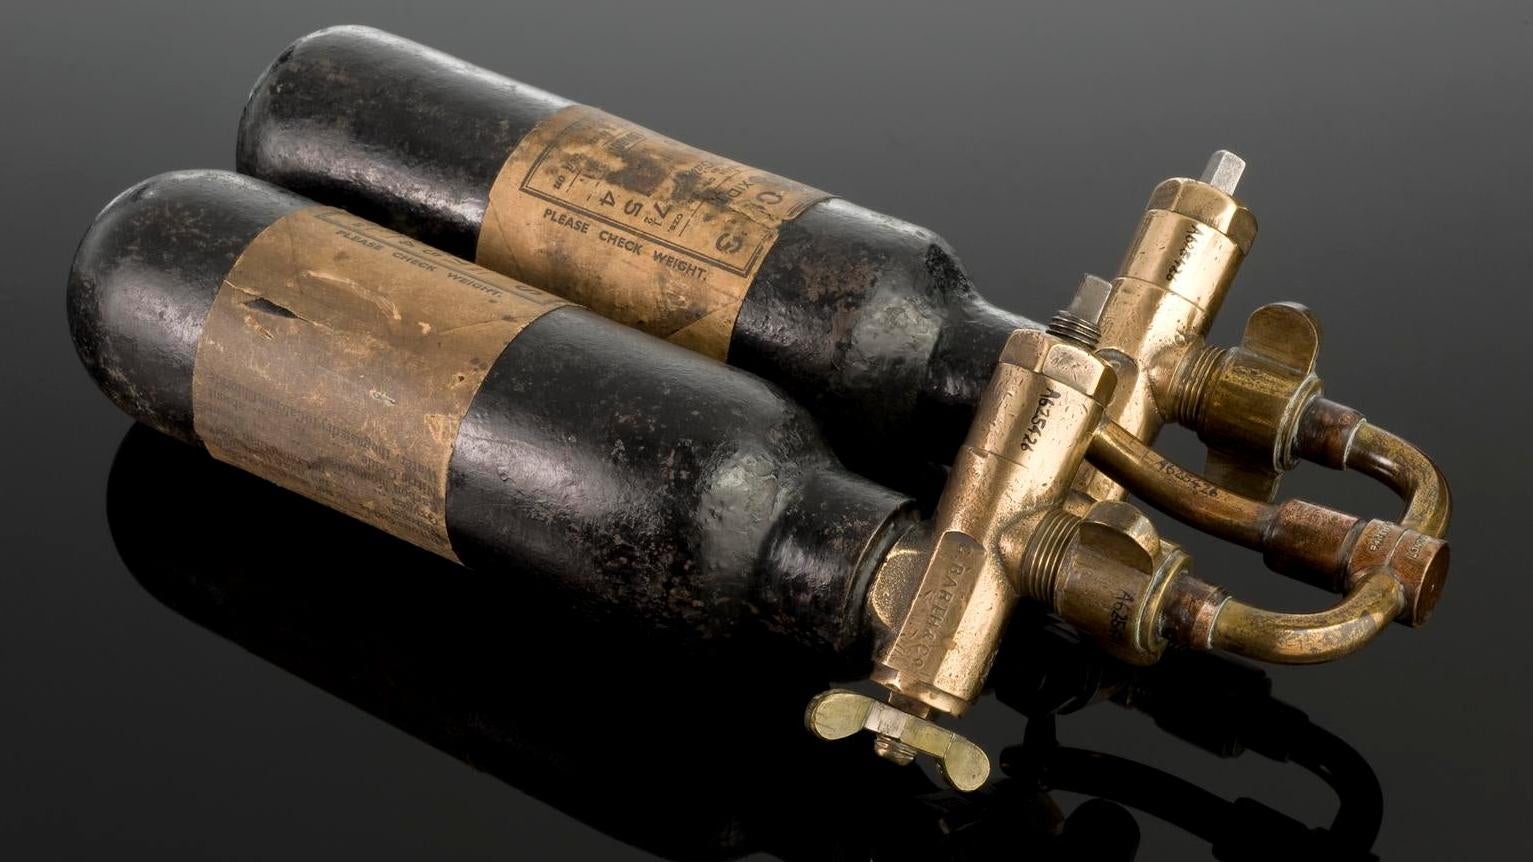 Laughing gas has been used as an anesthetic by doctors for centuries, as illustrated by these empty nitrous oxide cylinders used in the UK between 1915-1940. (Photo: Science Museum Group Collection/CC BY-NC-SA 4.0)